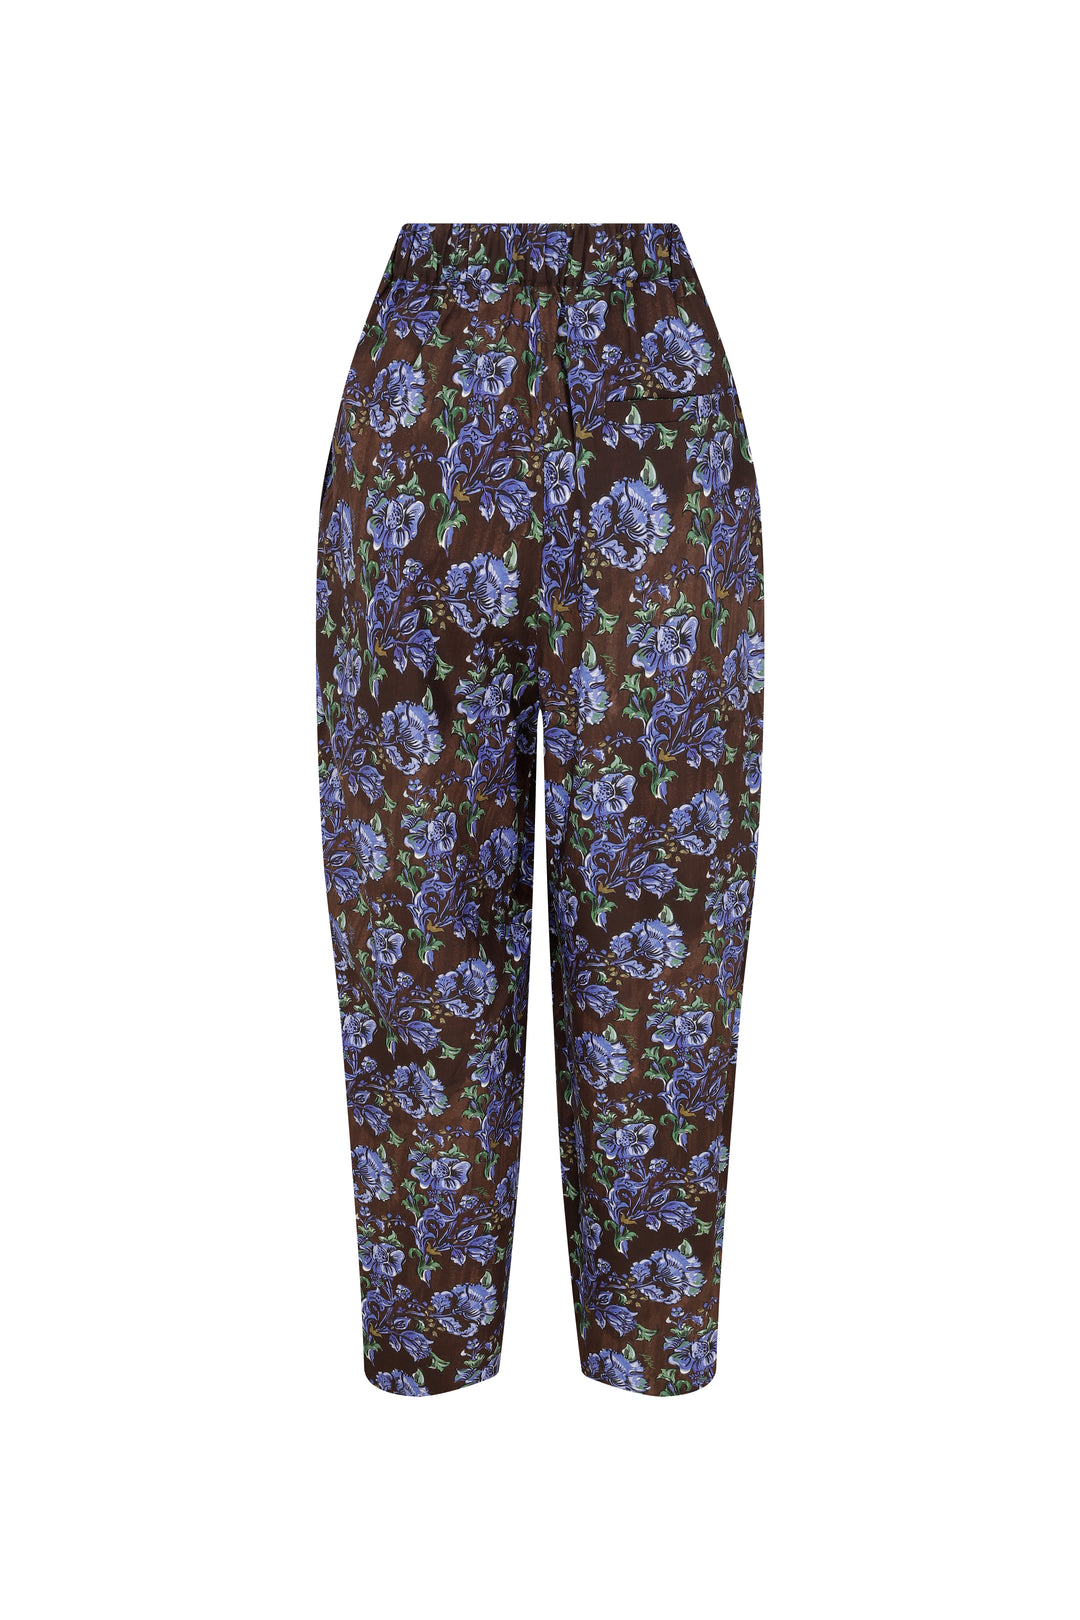 Olaf - Brown Tapered Pants With Sophisticated Print